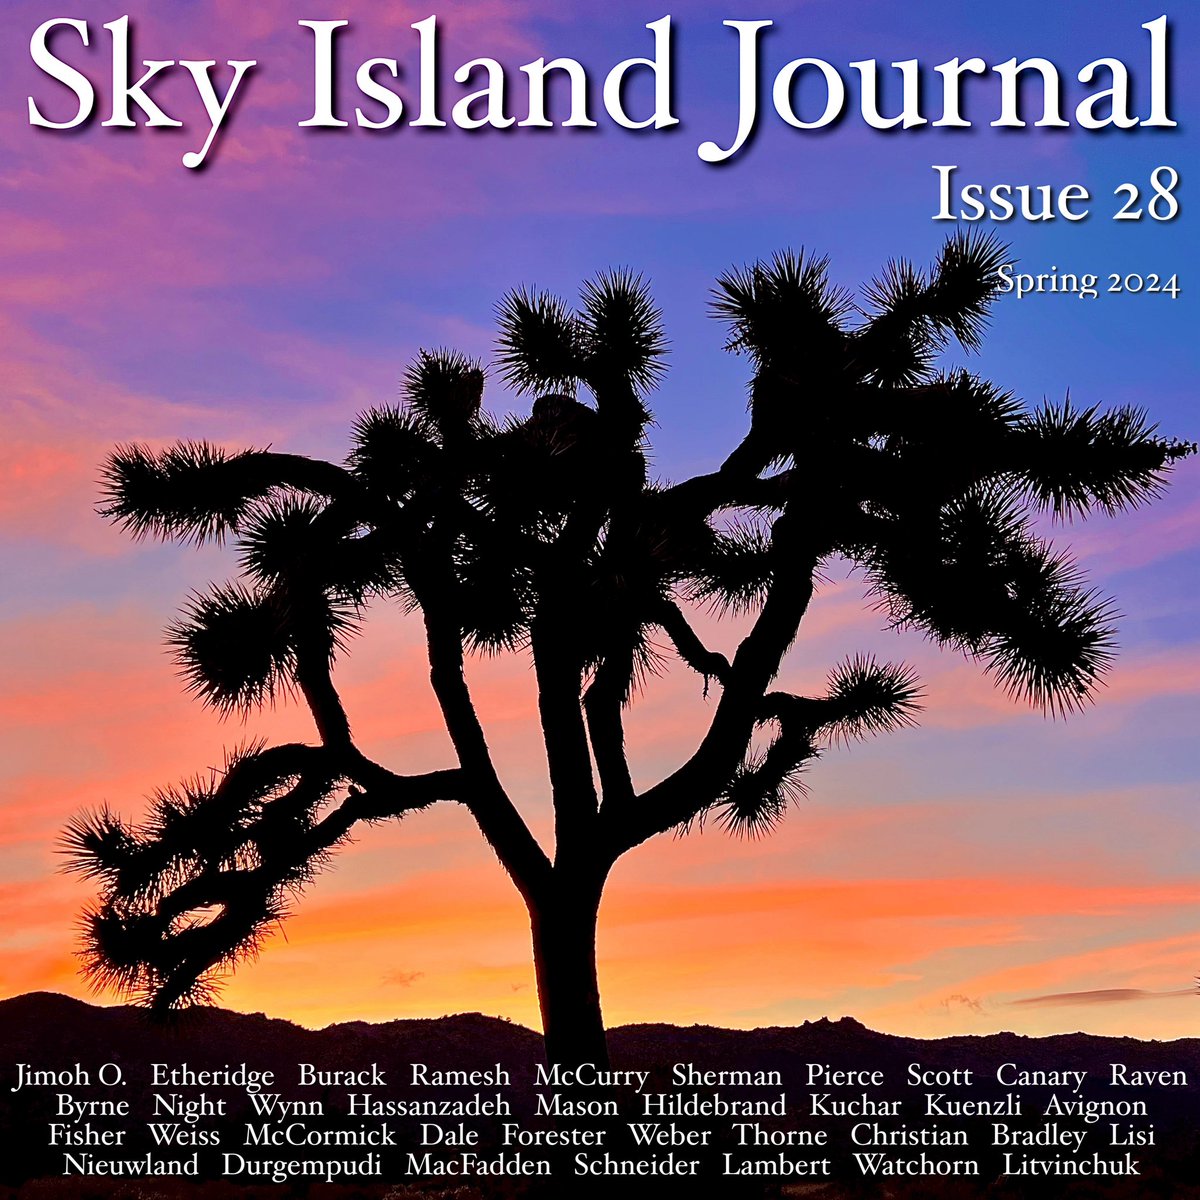 It’s launch day! Our stunning Issue 28 features AMAZING authors and unique perspectives from all around the world. Whether you’re new to Sky Island Journal—or you’re already one of our over 150,000 readers in 150 countries—curl up, relax, and join us! skyislandjournal.com